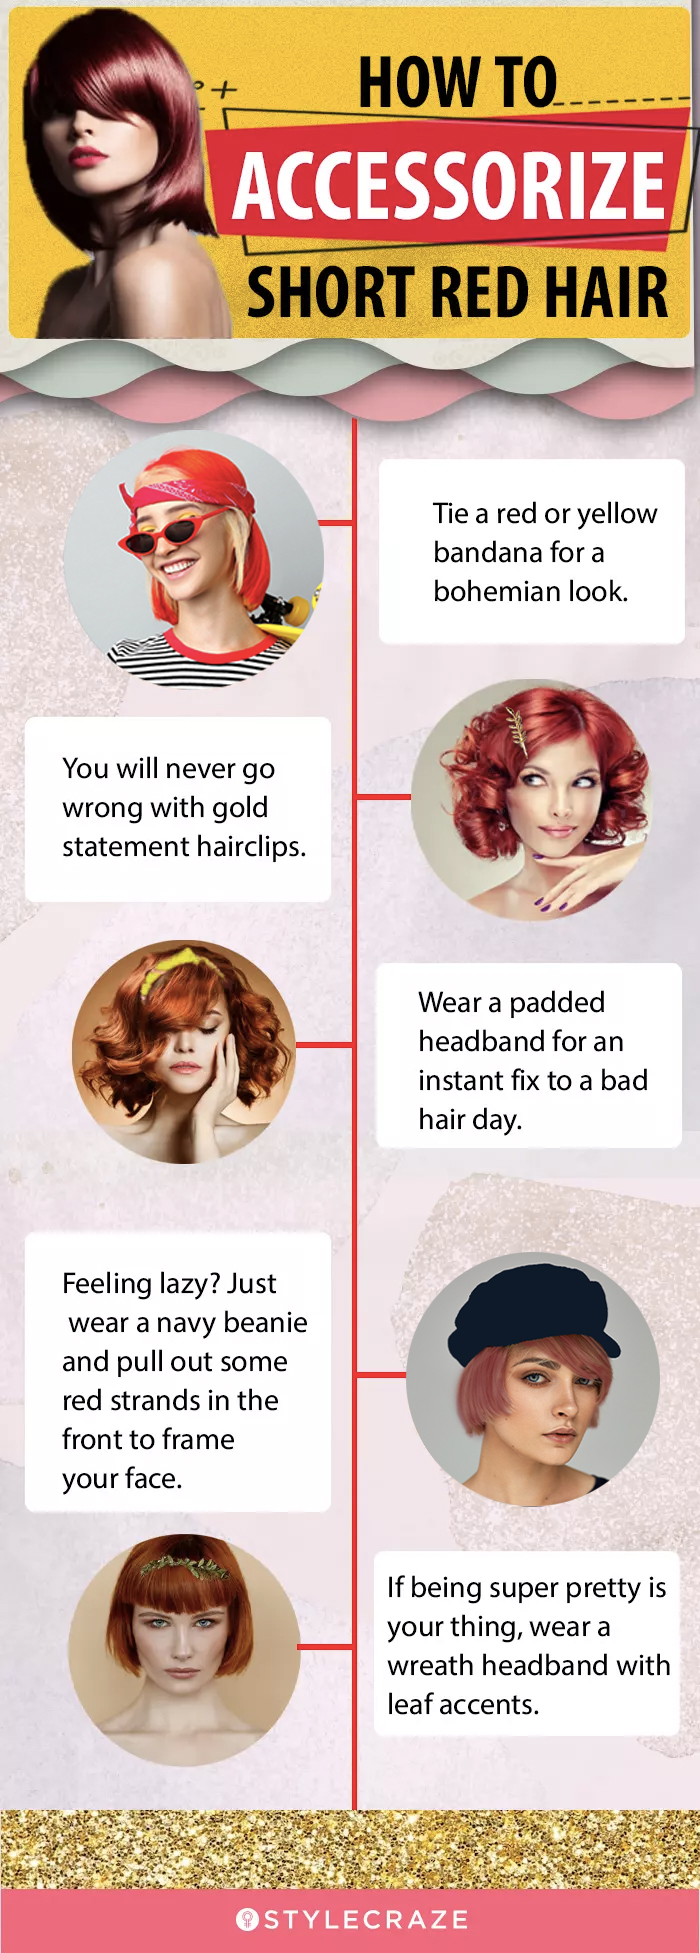 how to accessorize short red hair (infographic)